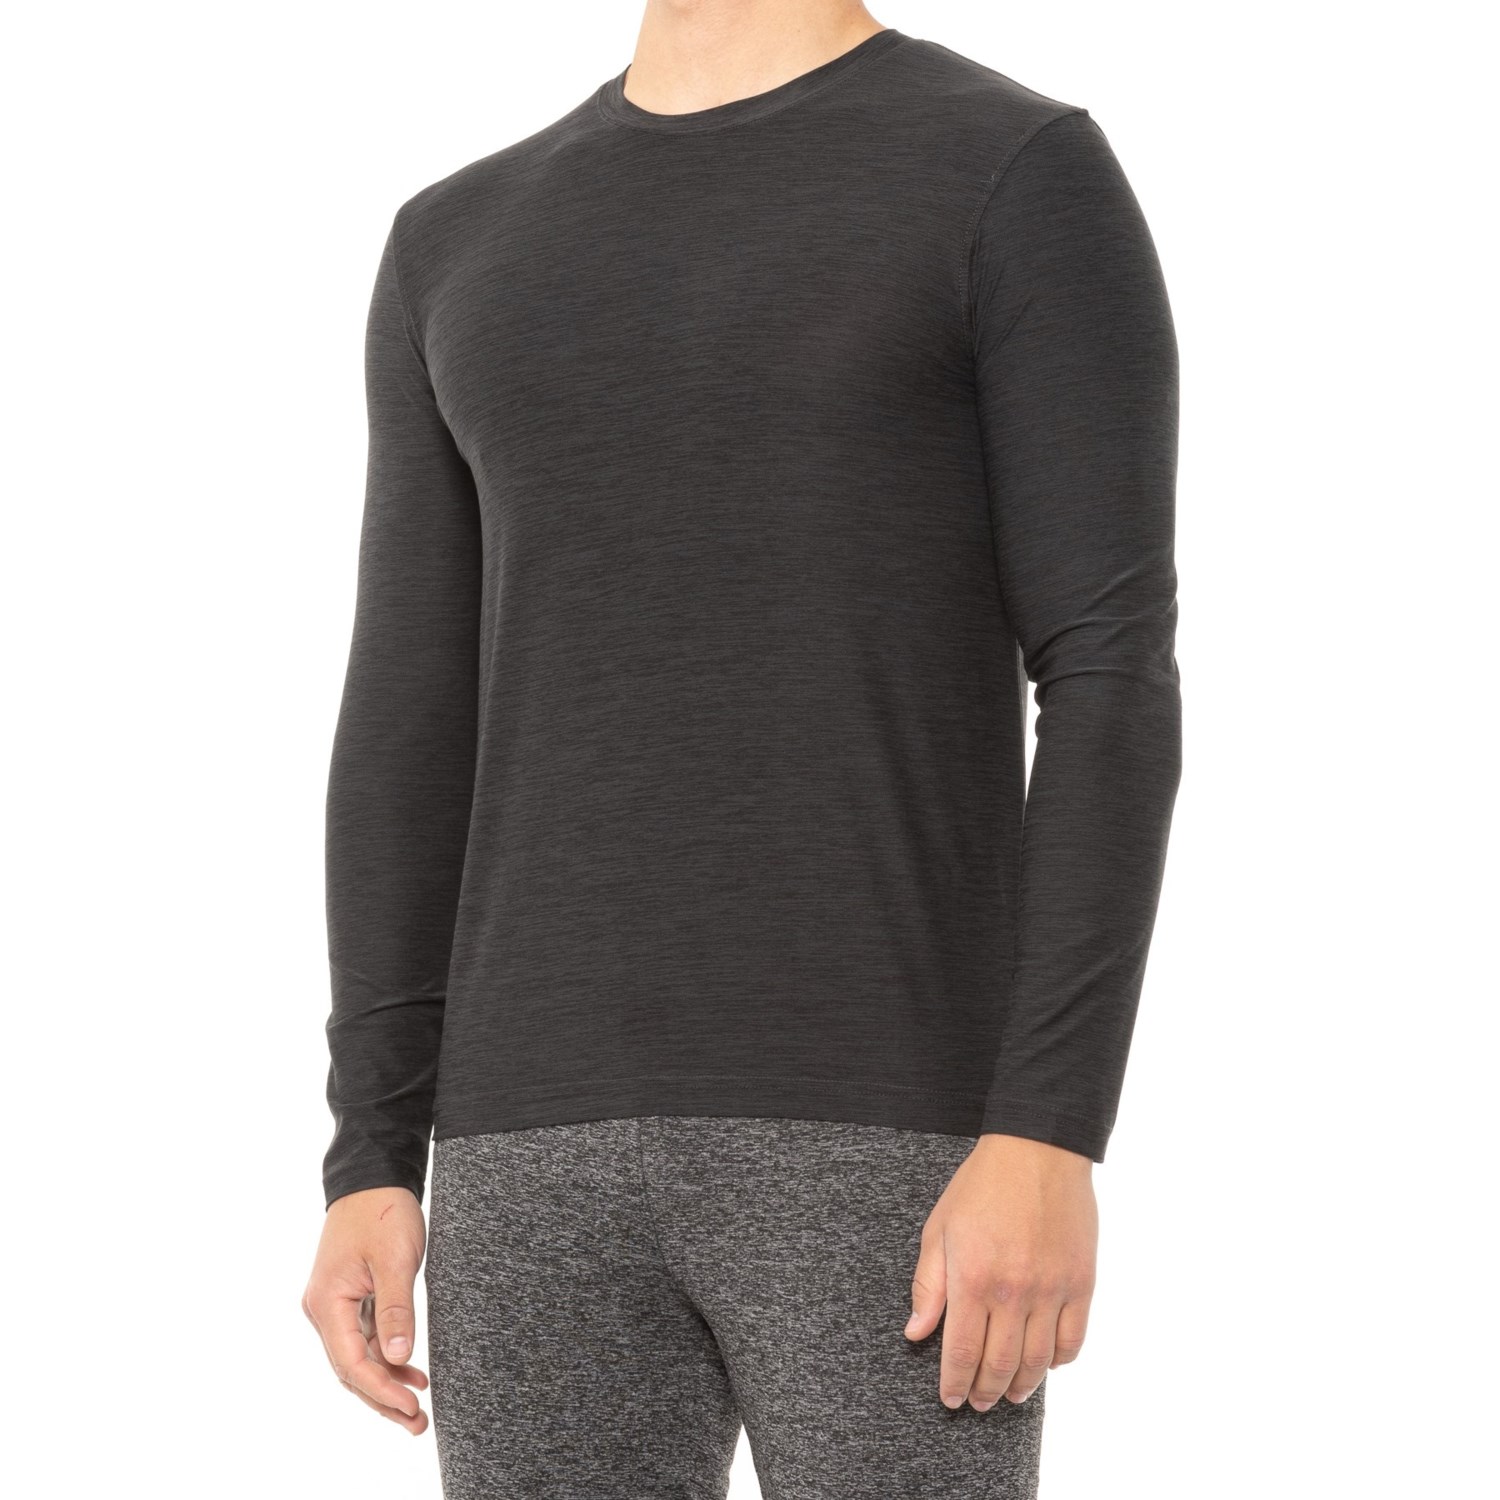 Leg3nd Ultra Luxe Space-Dye Shirt (For Men) - Save 27%